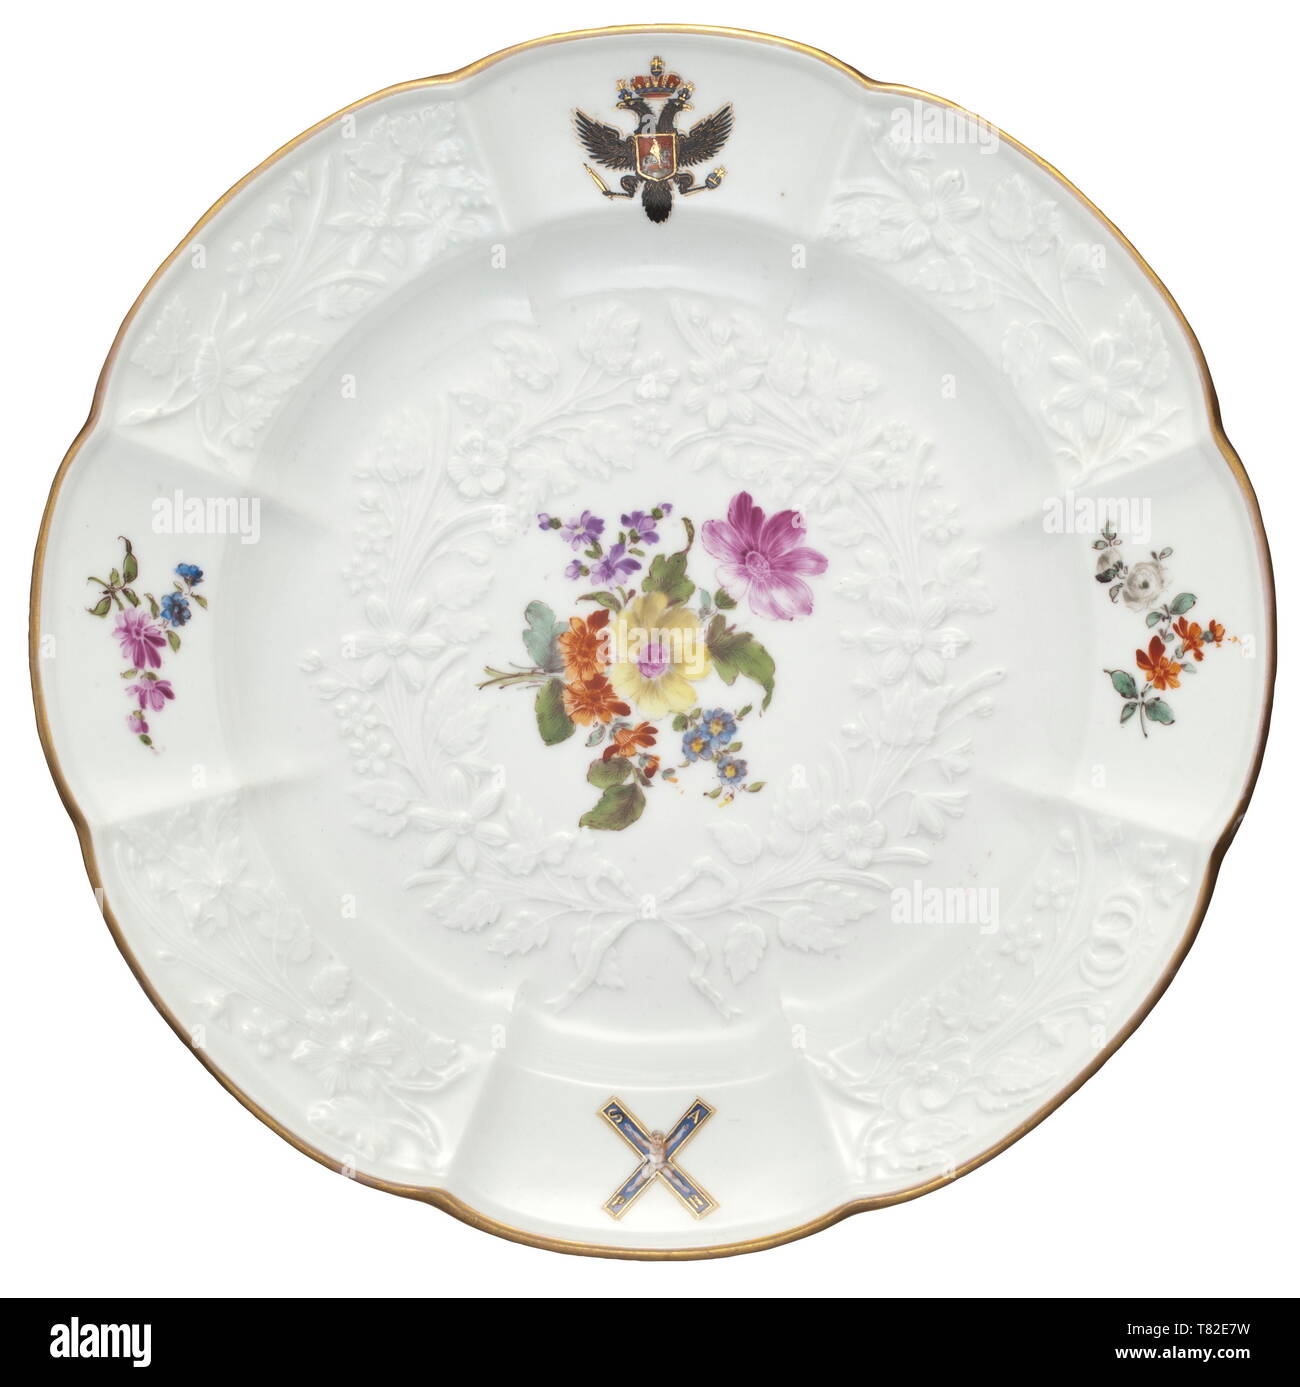 An important plate from the St. Andrew service, Meissen Porcelain Factory, circa 1774/75 Designed by J.F. Eberlein, 1744. White glazed porcelain, the border and centre with floral decoration (Gotzkowsky) in fine relief. In the centre a hand-painted bouquet, the border with a Russian double-headed eagle surmounted by a tsar's crown and the St. Andrew's Cross, gilt rim. Blue underglaze mark of crossed swords and red Hermitage inventory number on the bottom. Diameter 24.7 cm. Extremely good condition and quality. Rare. The plate is a piece from the , Additional-Rights-Clearance-Info-Not-Available Stock Photo